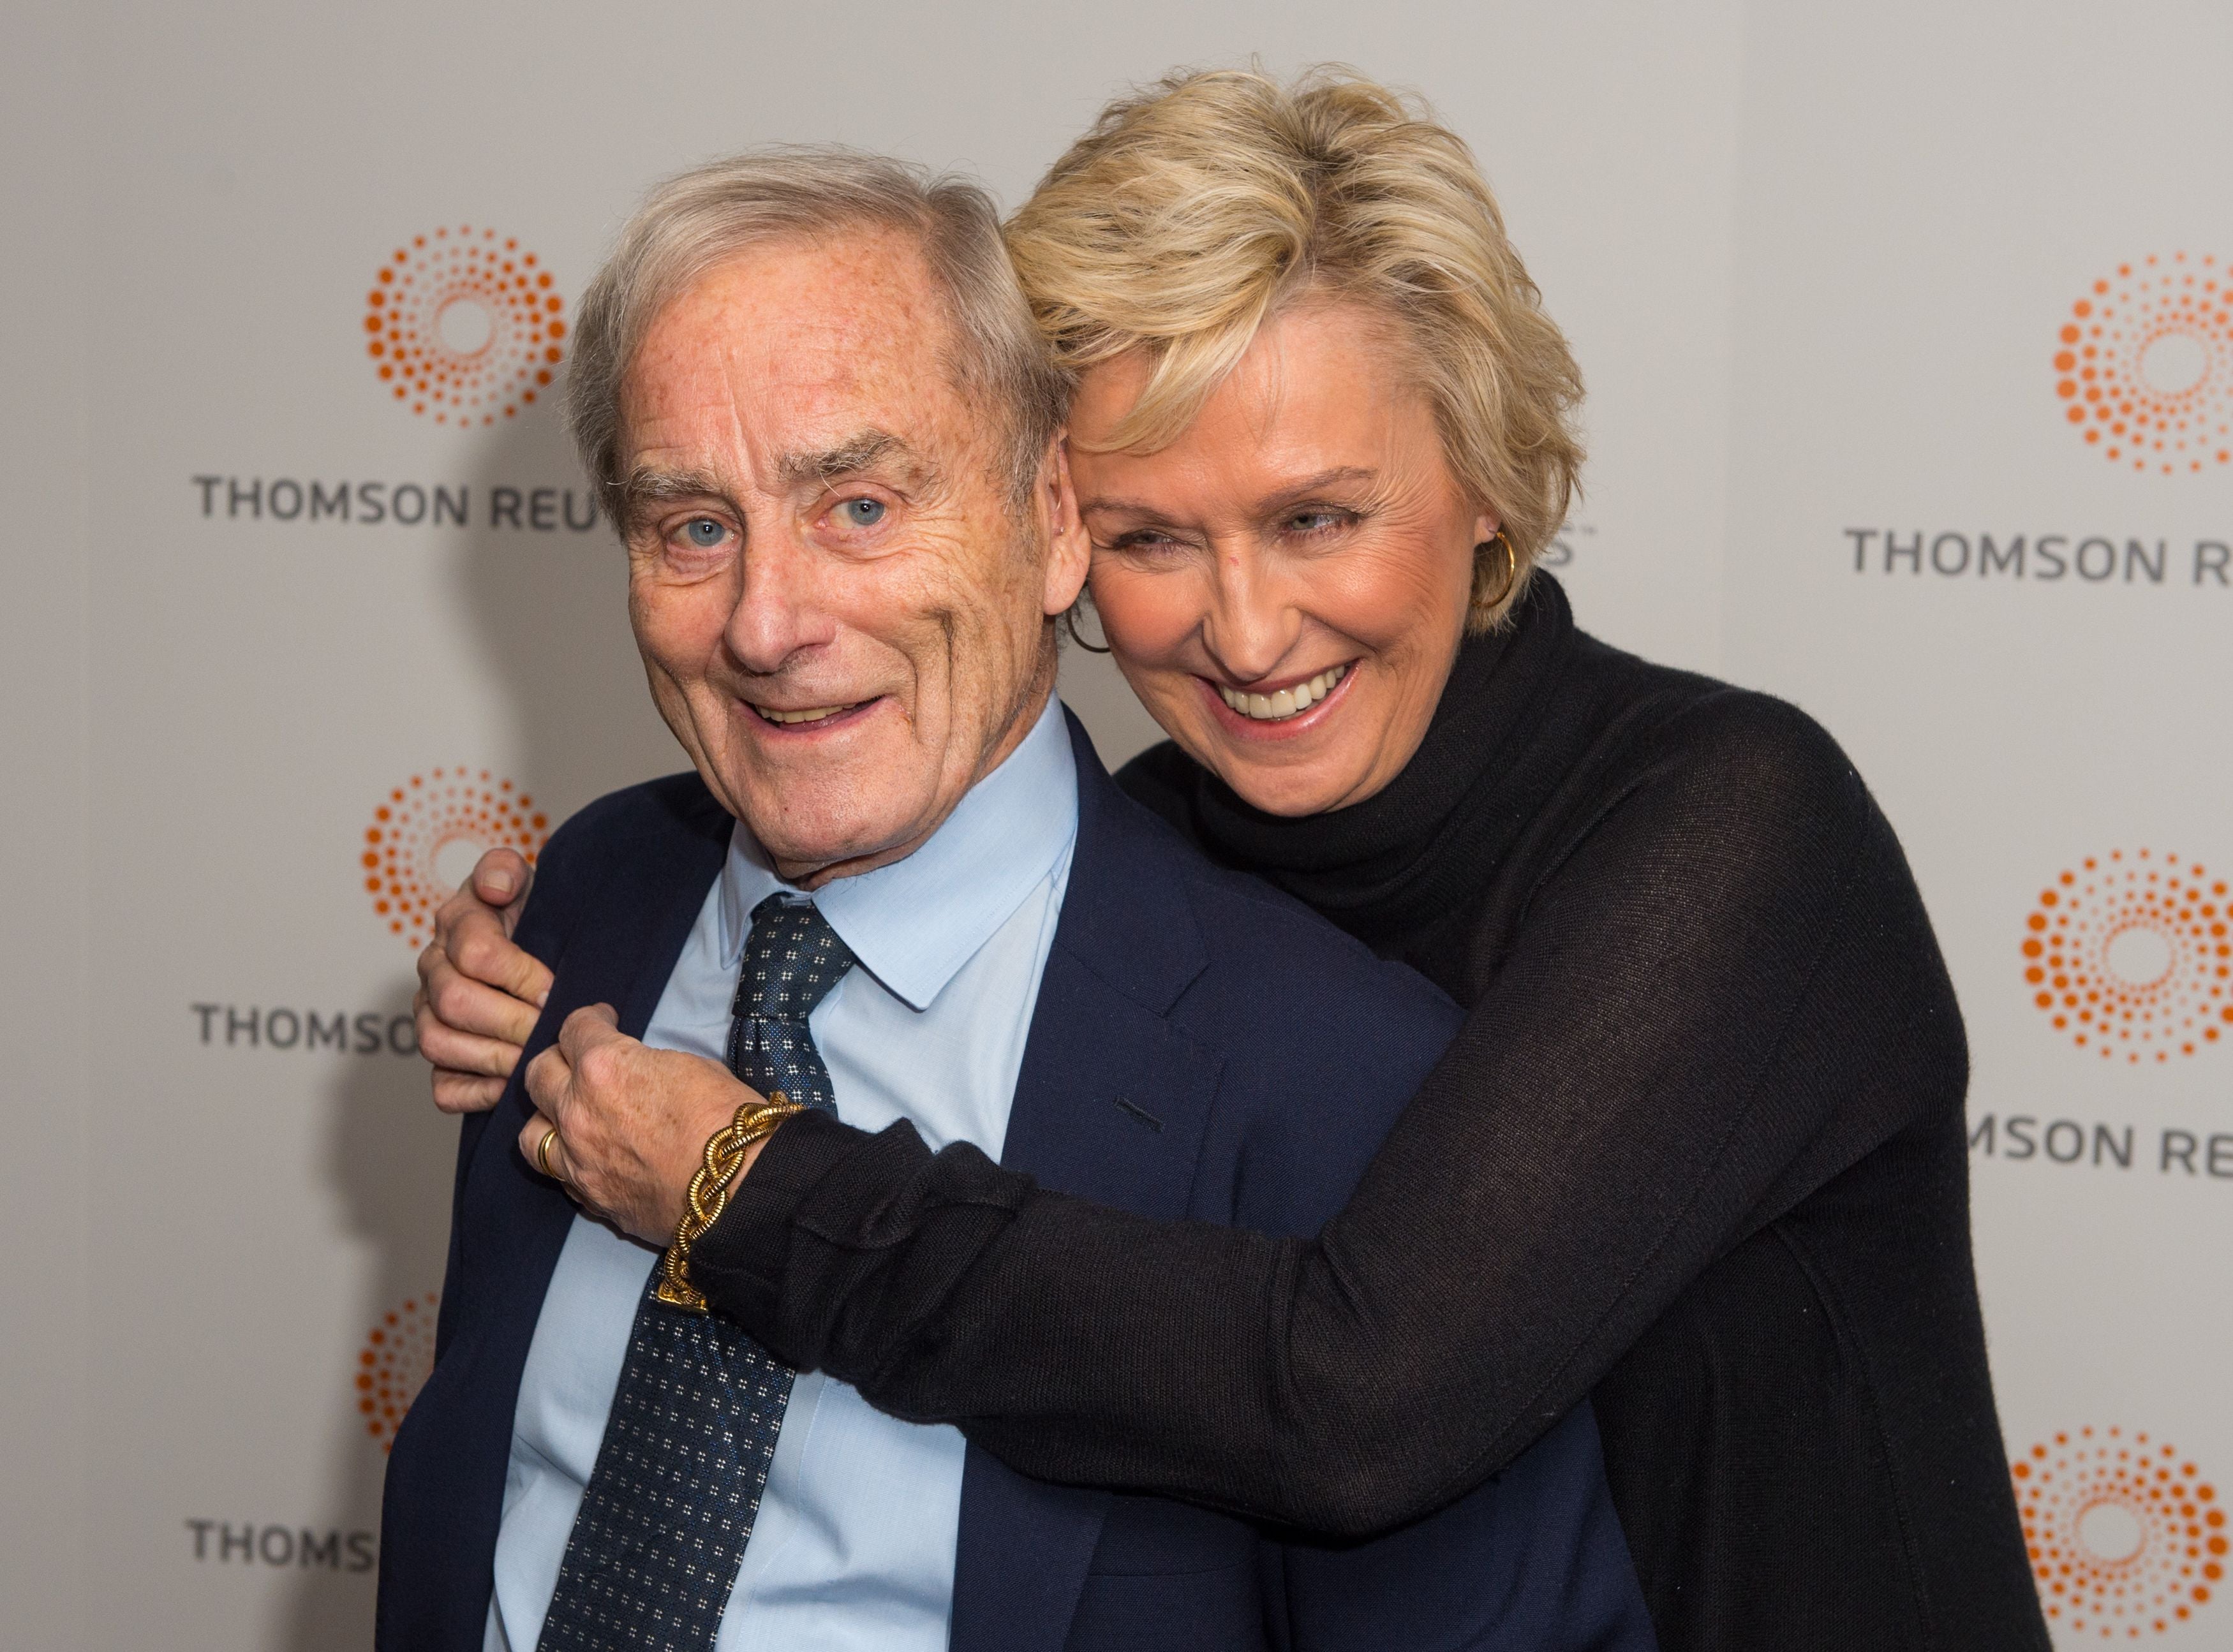 Evans and Tina Brown were married for almost 40 years